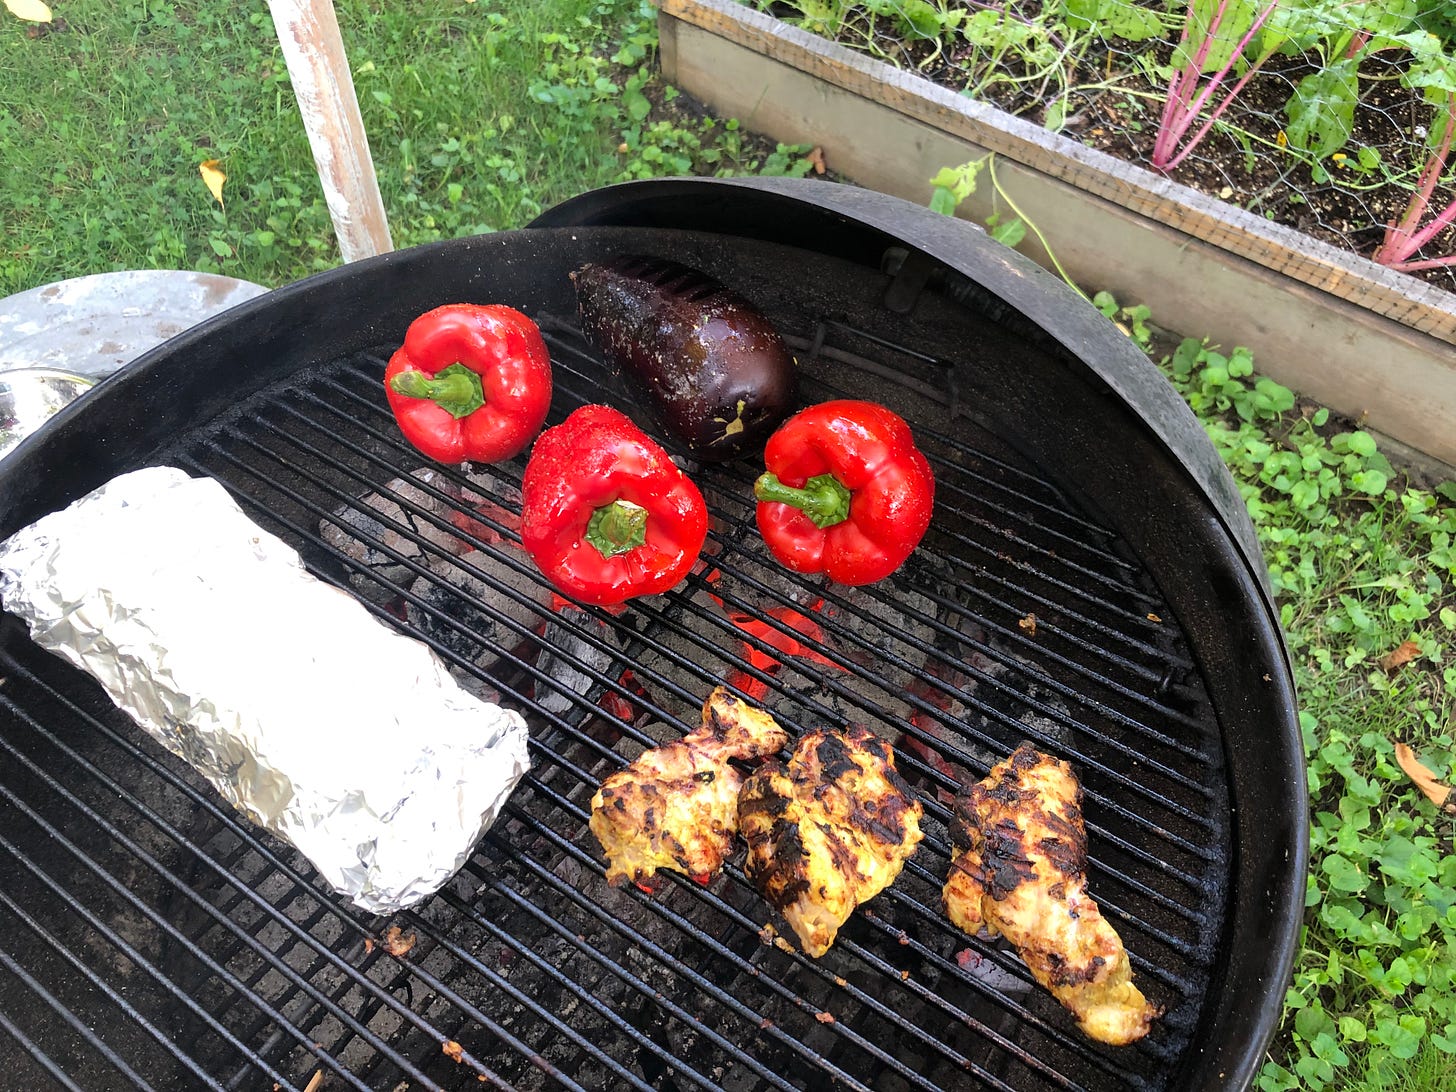 A charcoal grill with XYLO charcoal blocks burning. Three red peppers and an eggplant are directly over the coals. A foil packet of potatoes and some marinated chicken thighs are offset slightly and not directly over the coals.